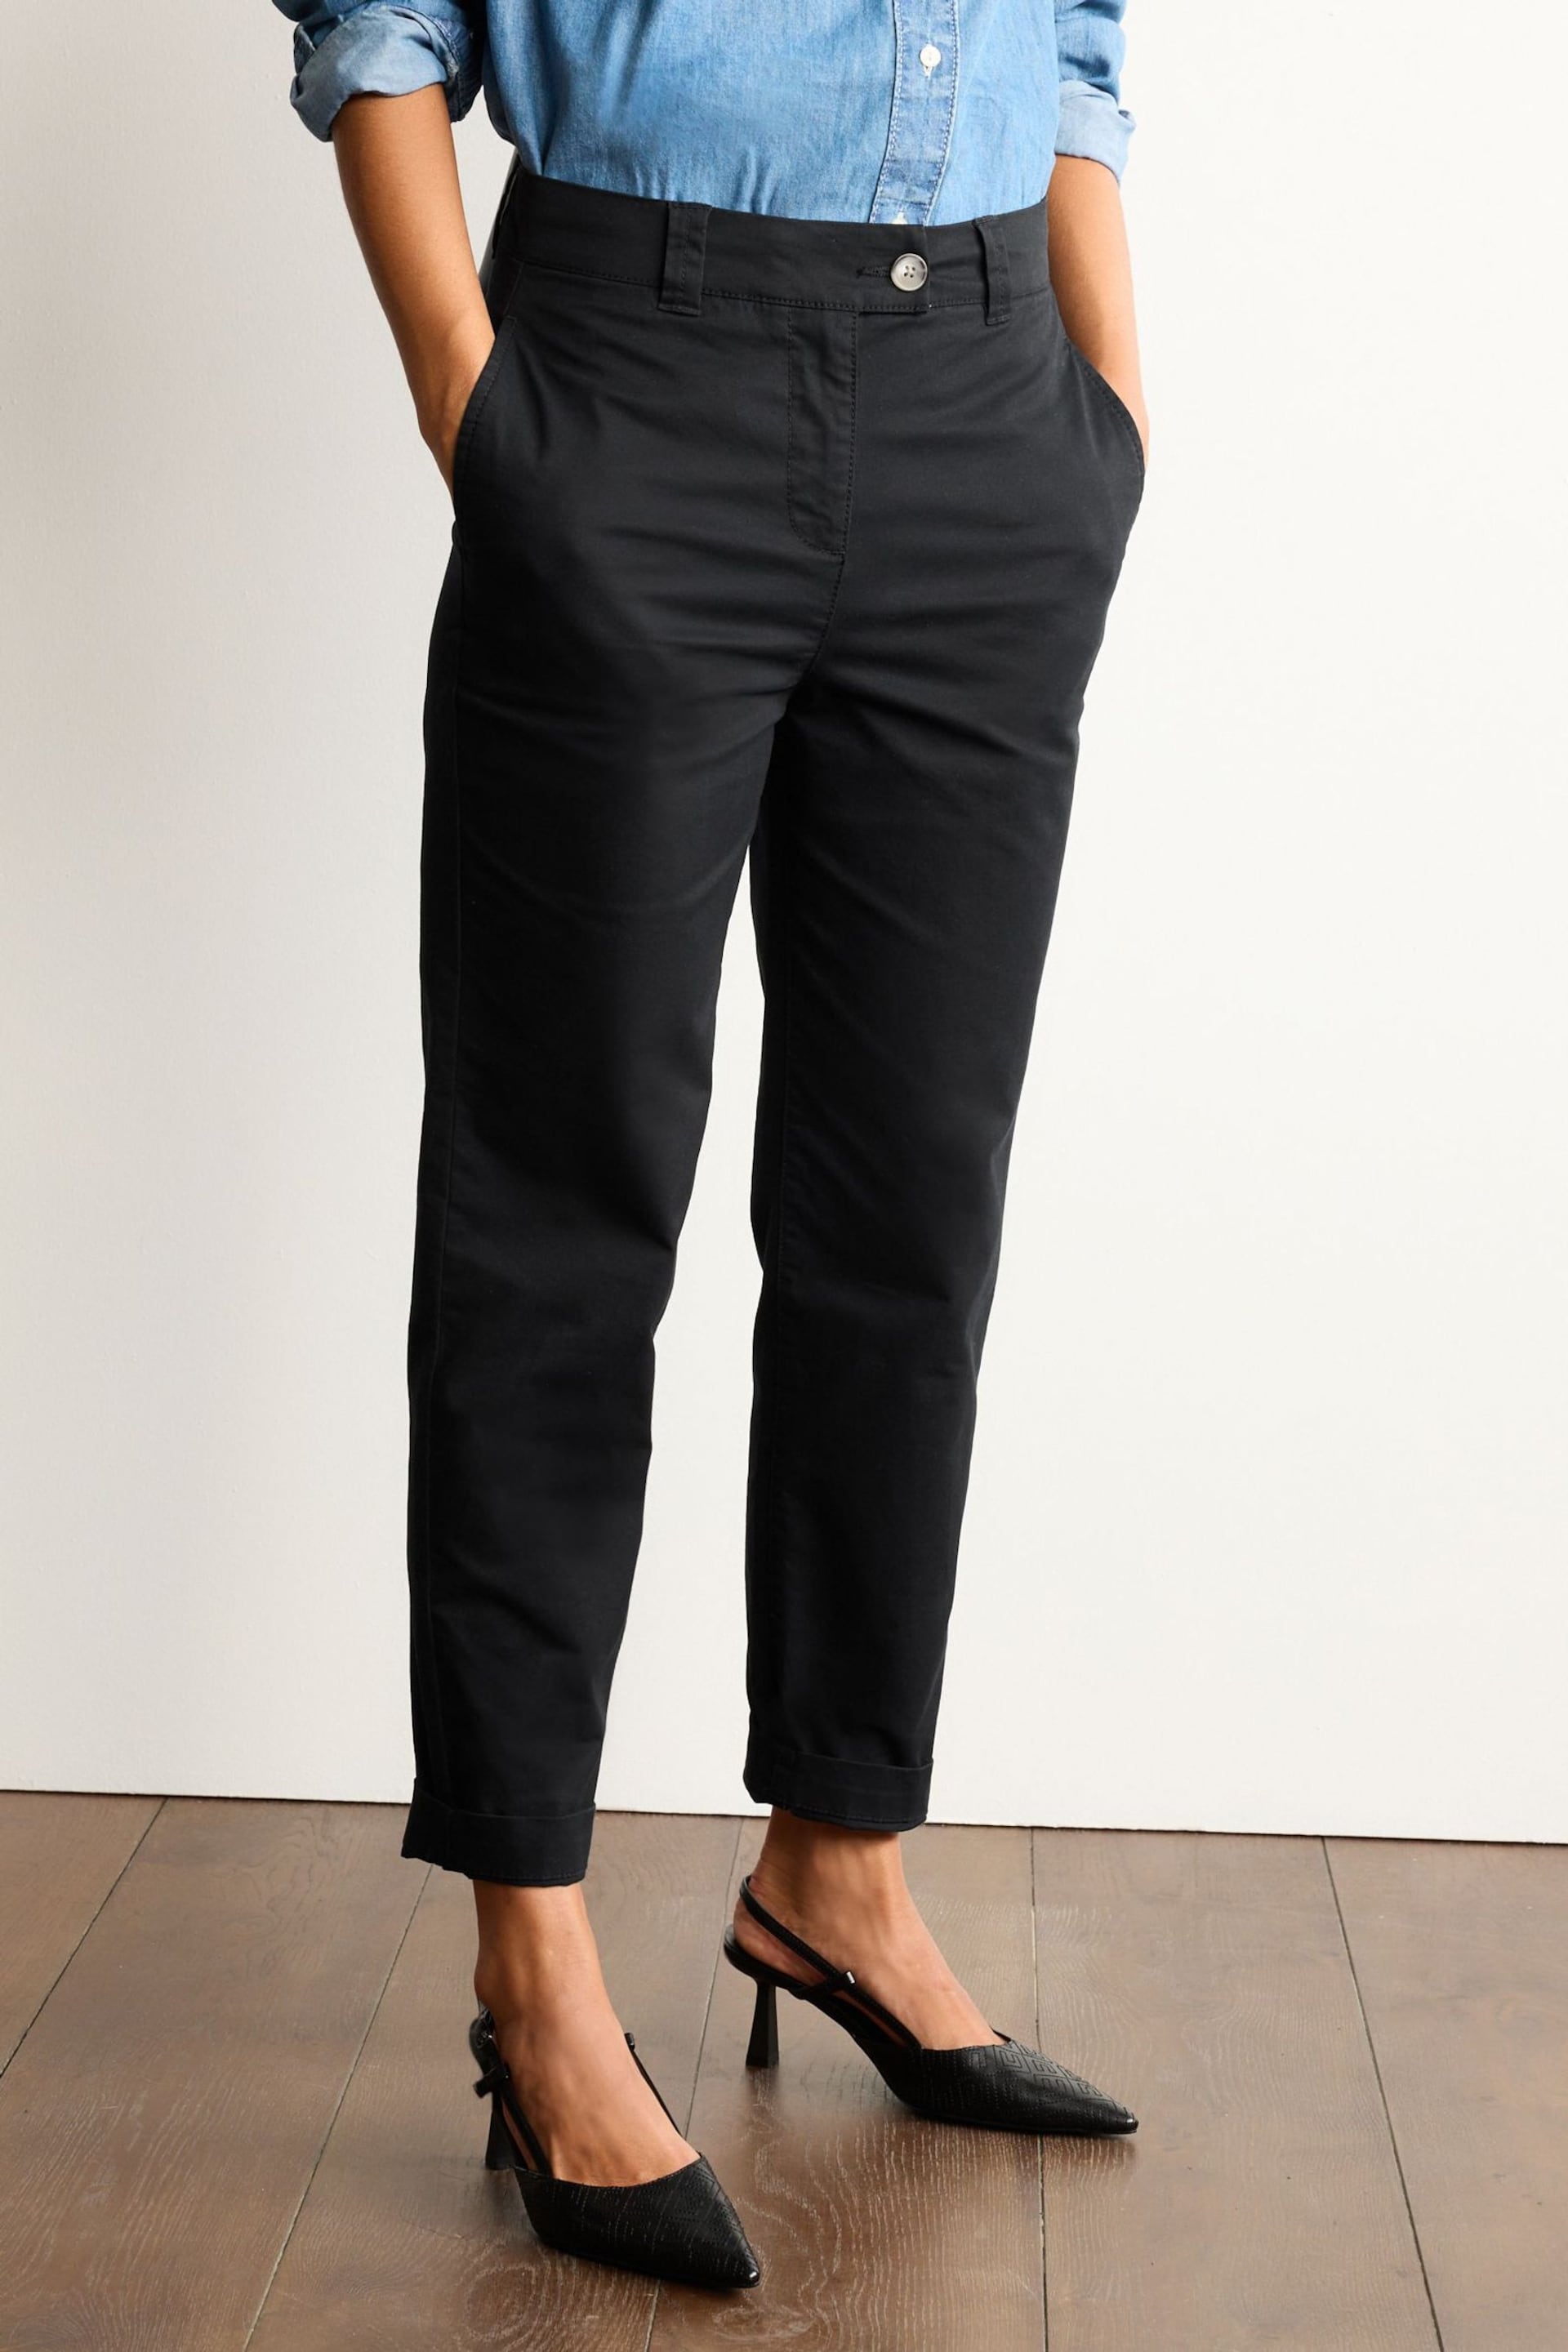 Black The Ultimate Cotton Rich Chino Trousers - Image 2 of 5